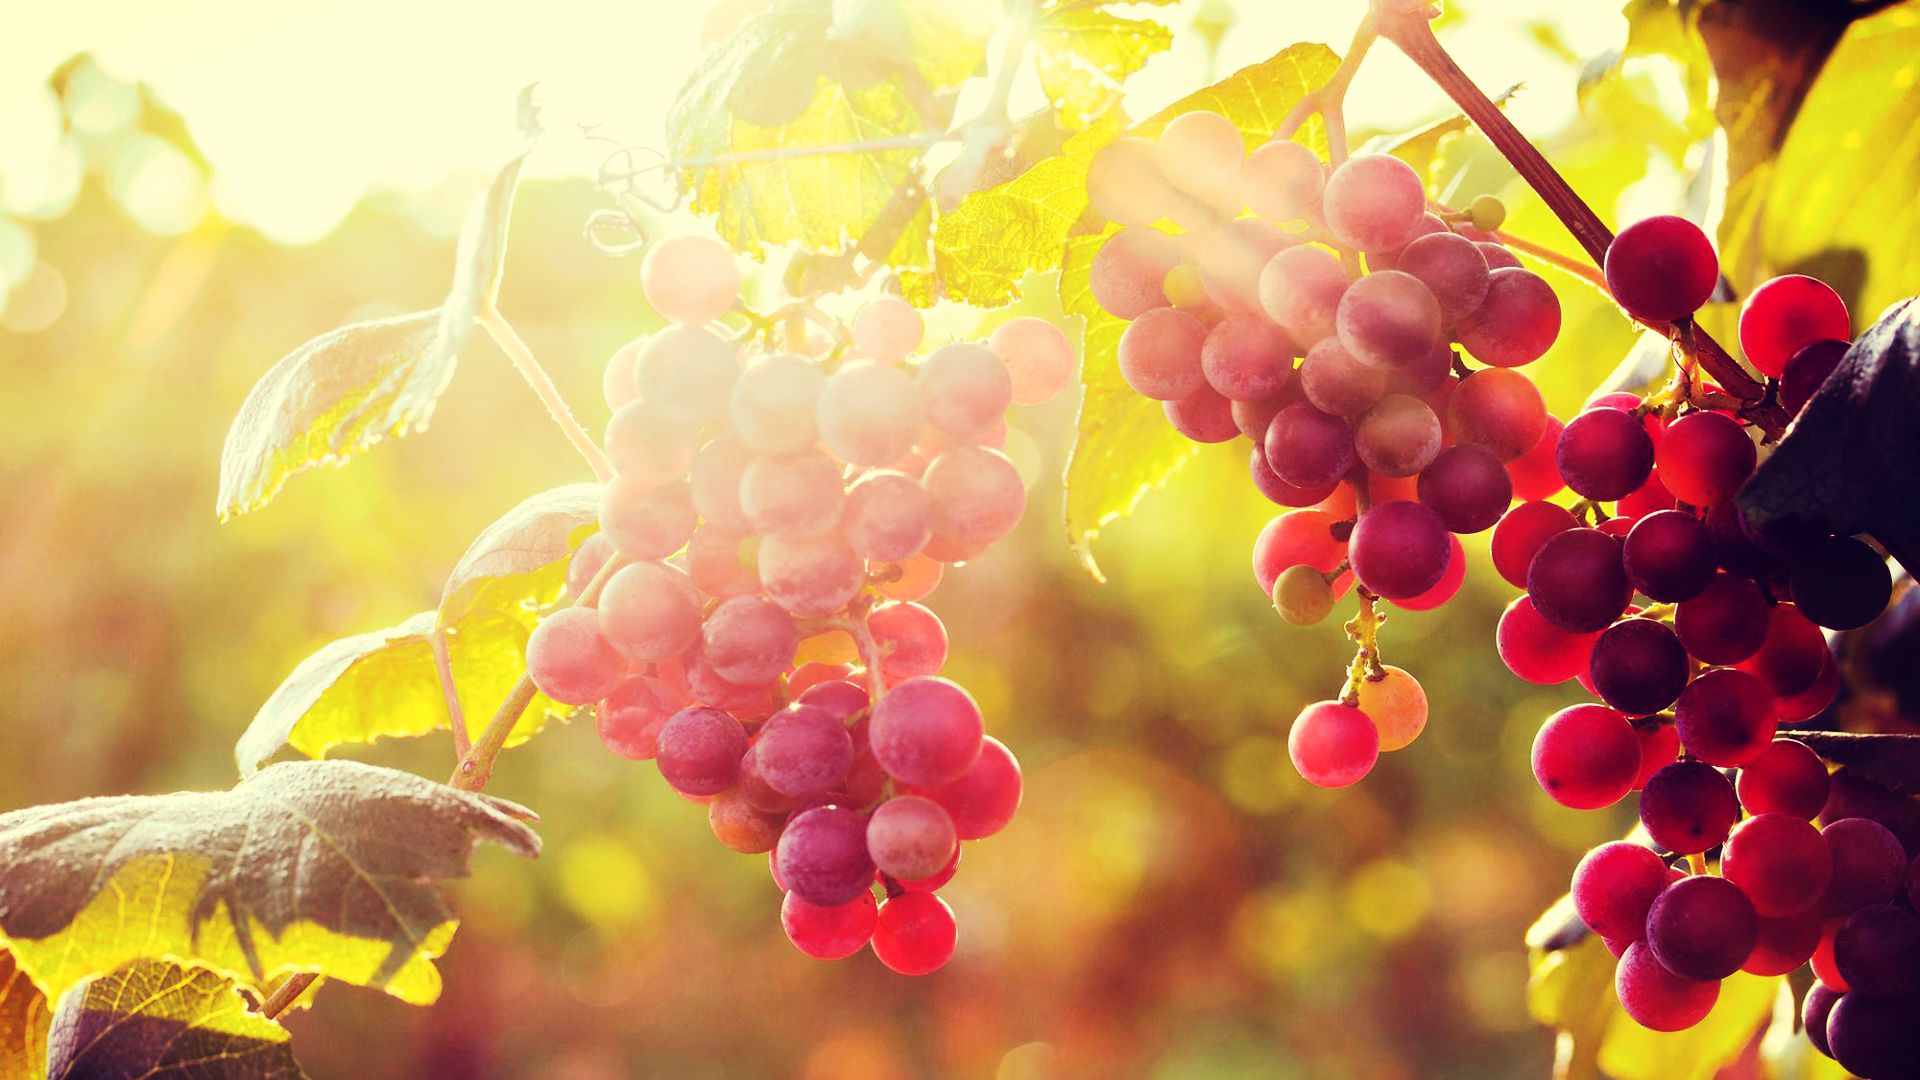 Sun With Grapes Wallpaper Android Wallpaperlepi